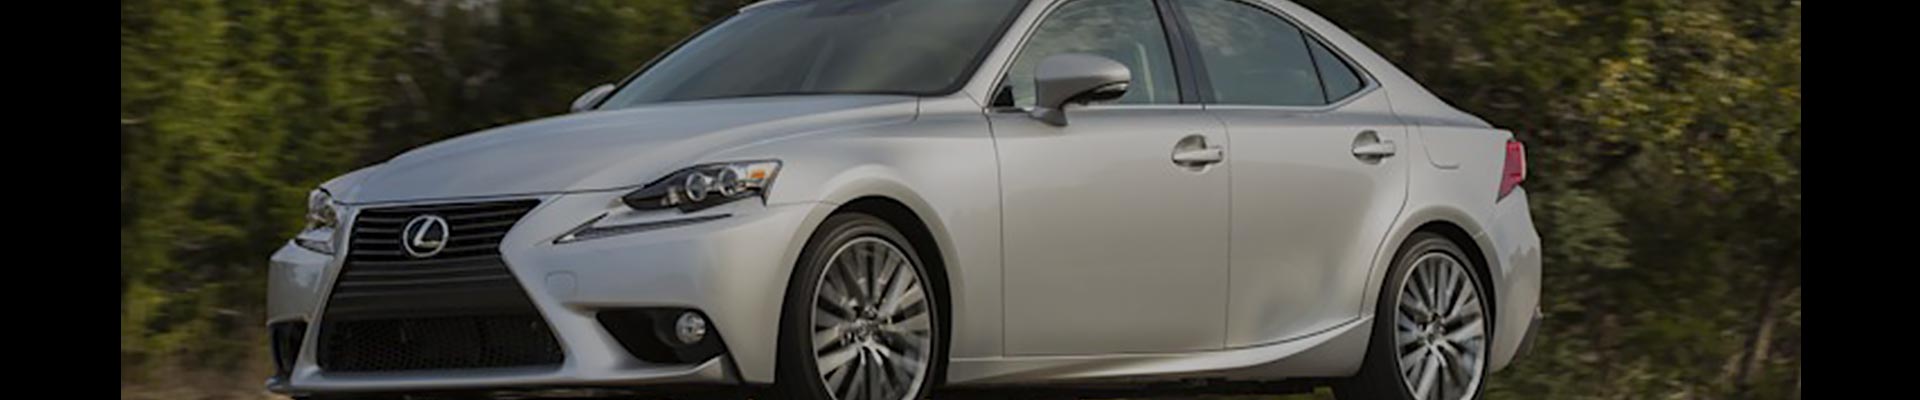 Shop Replacement and OEM 2014 Lexus IS250 Parts with Discounted Price on the Net